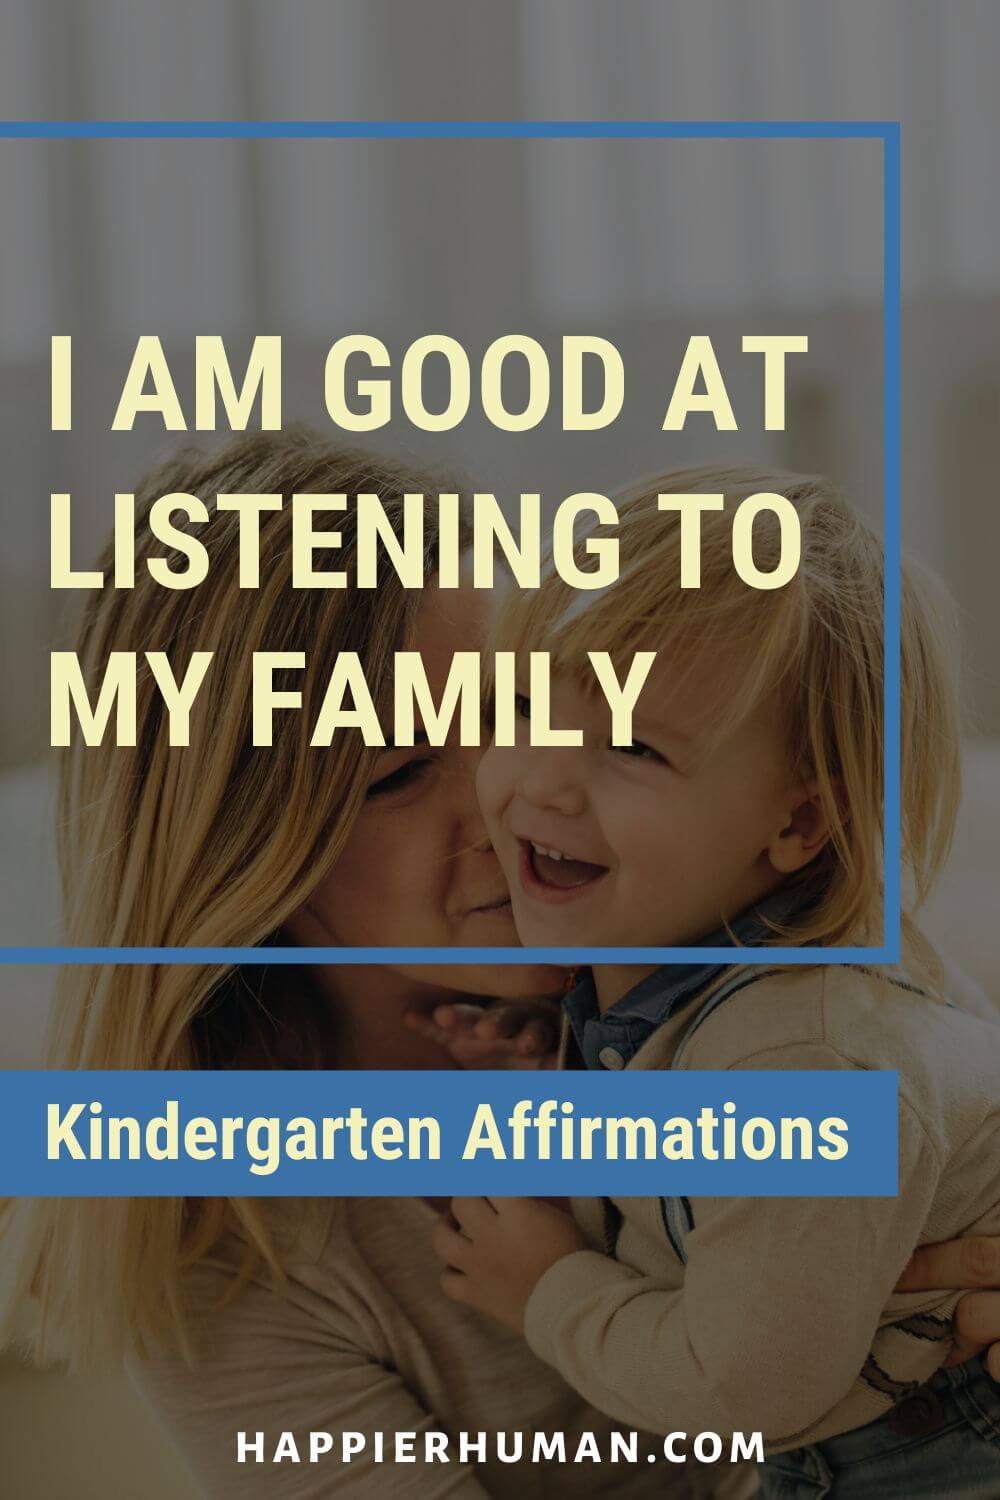 Kindergarten Affirmations - I am good at listening to my family | christian affirmations for kids | morning affirmations for kids | i am affirmations for kids